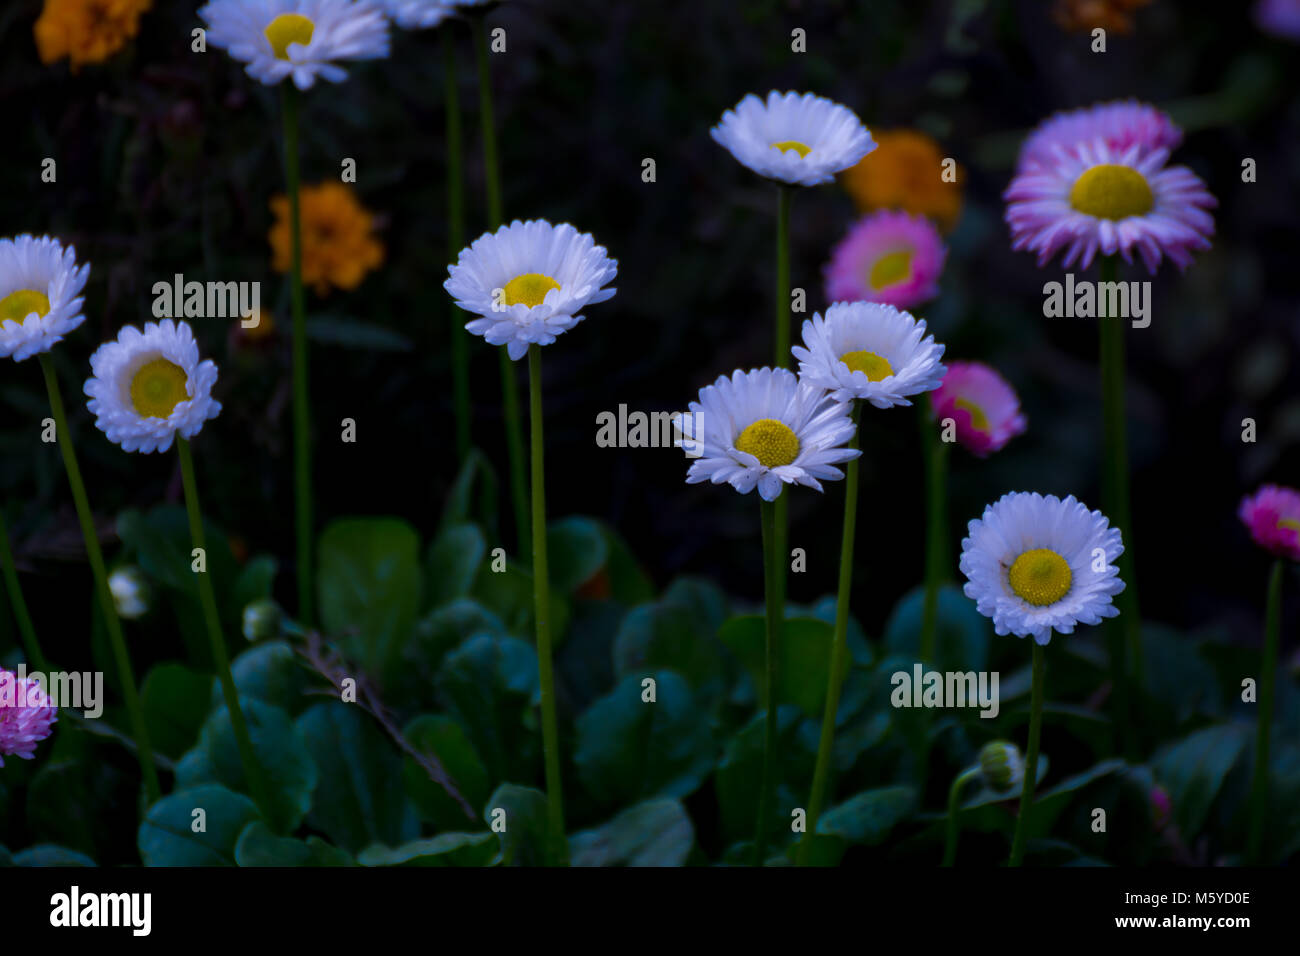 Long Stem White and Pink Daisy Flower Stock Photo